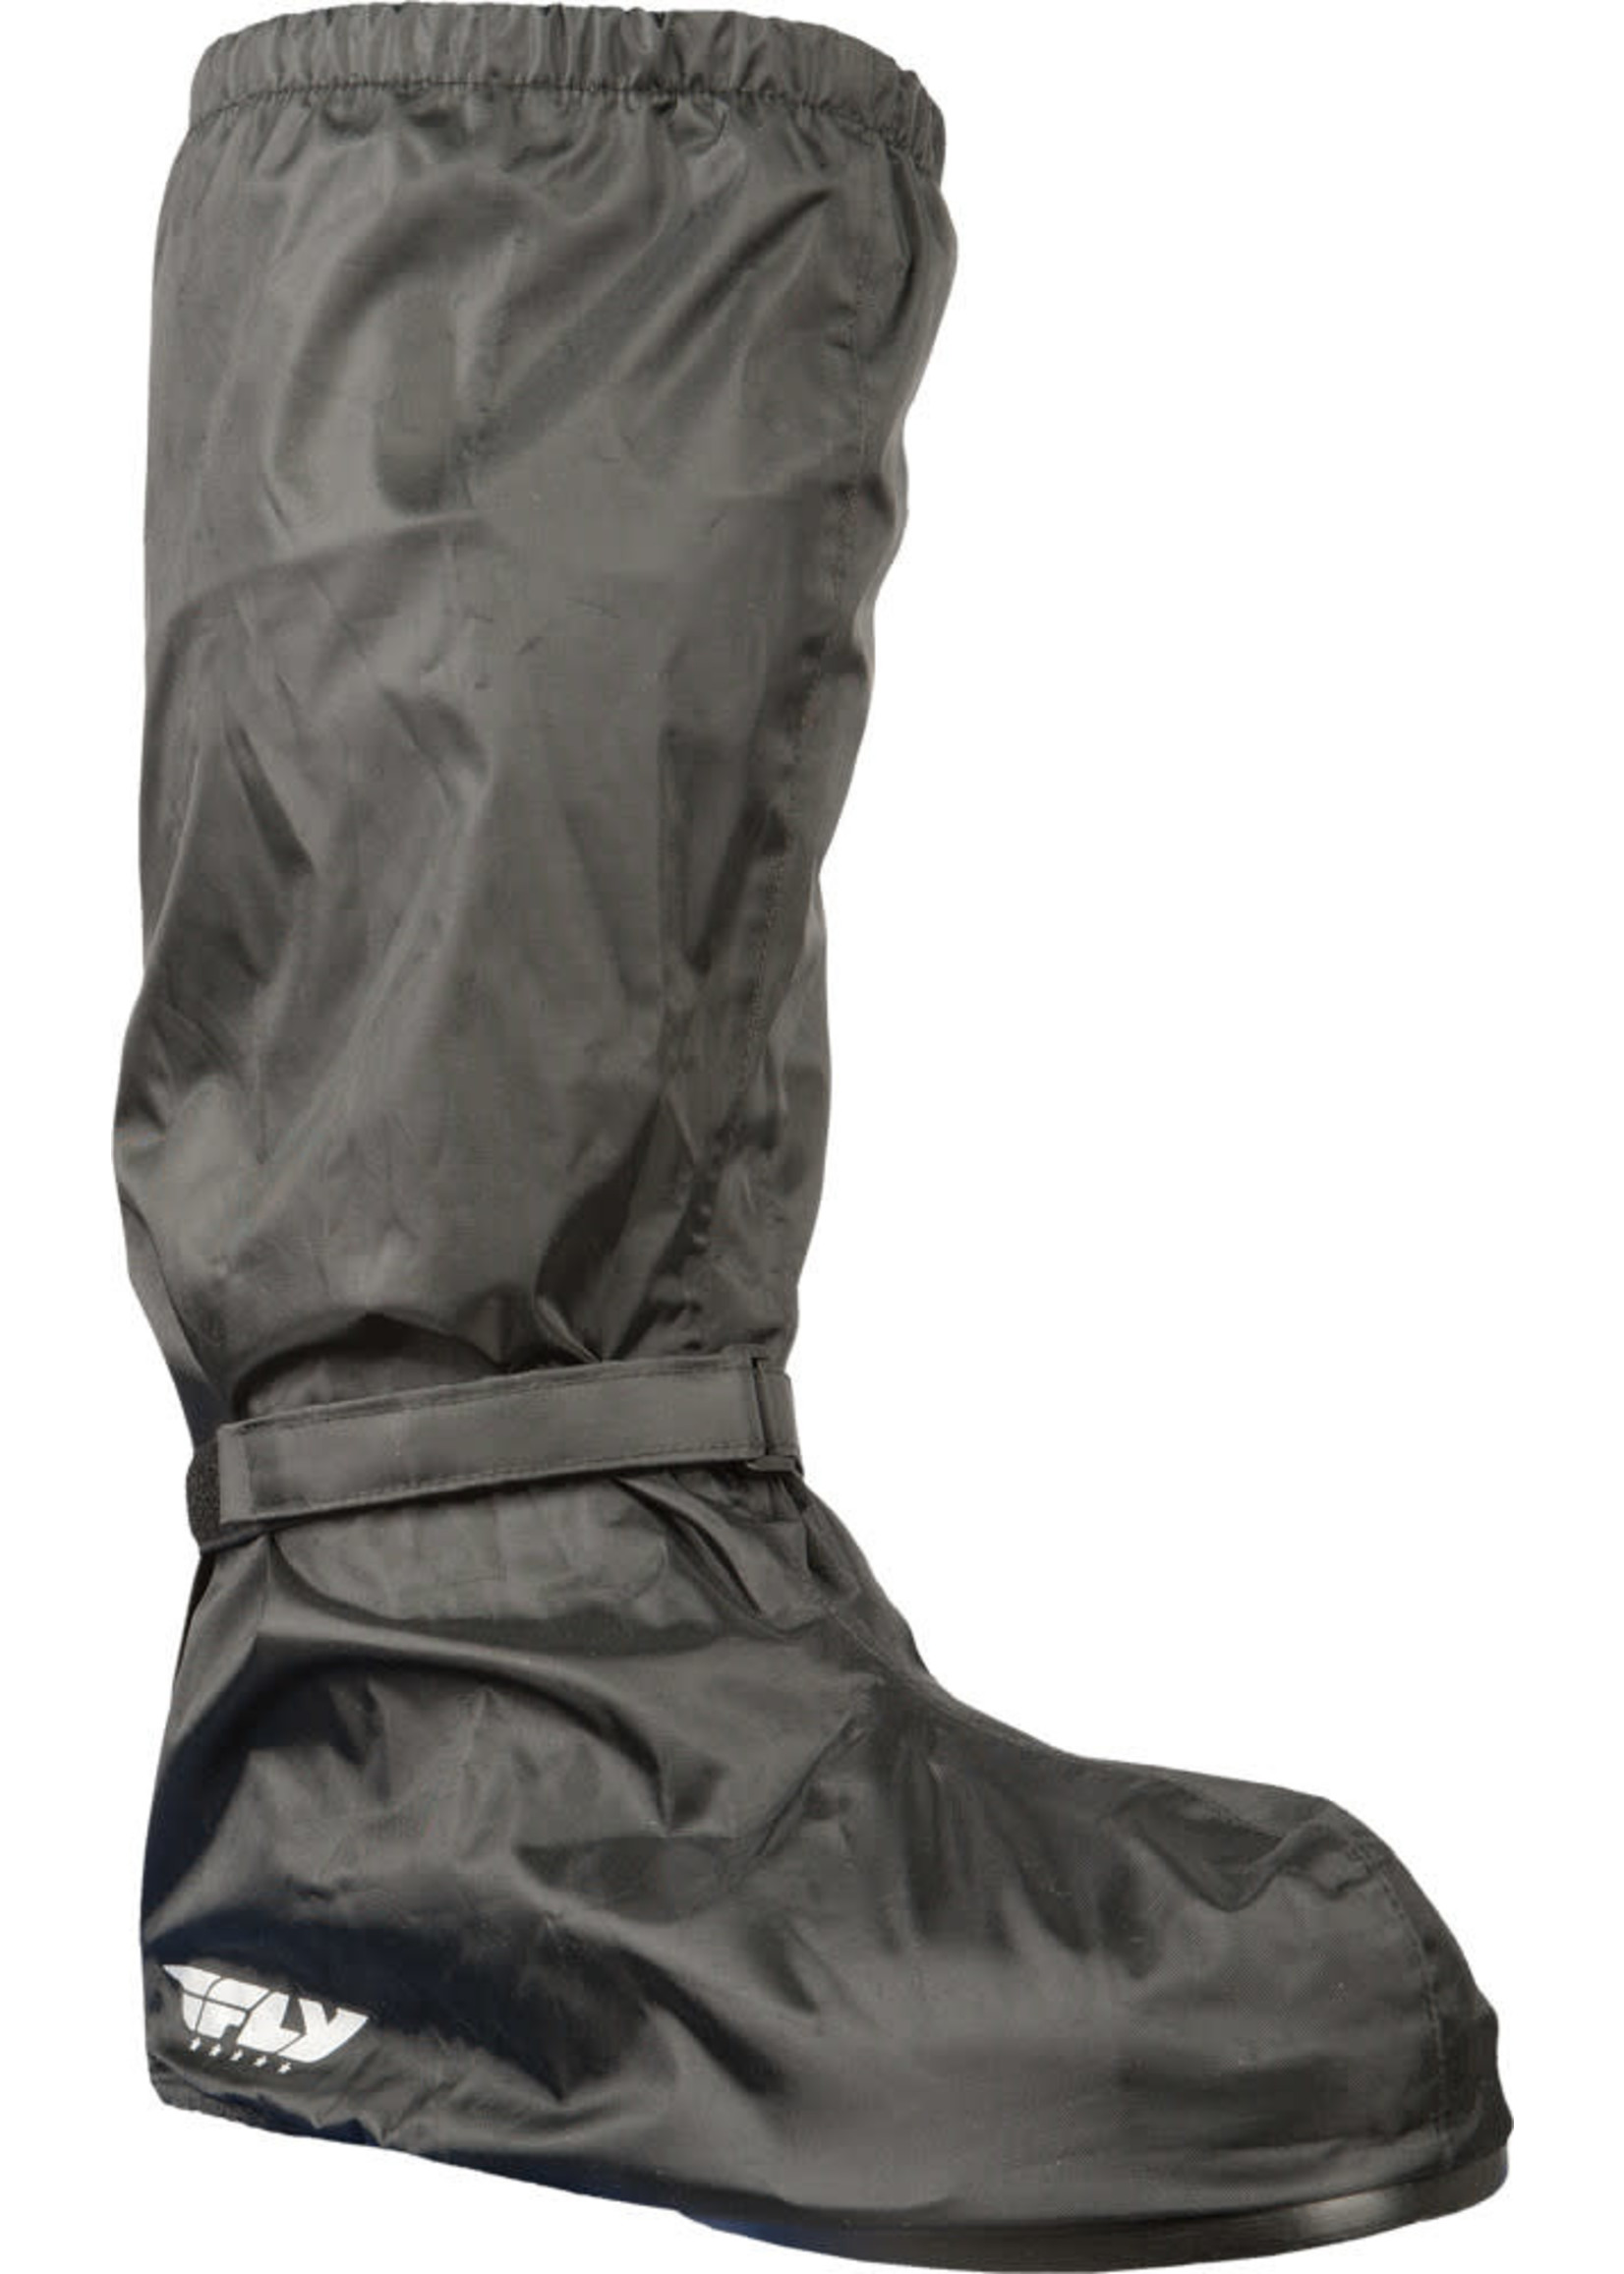 FLY RACING FLY RACING RAIN COVER BOOTS BLACK MD